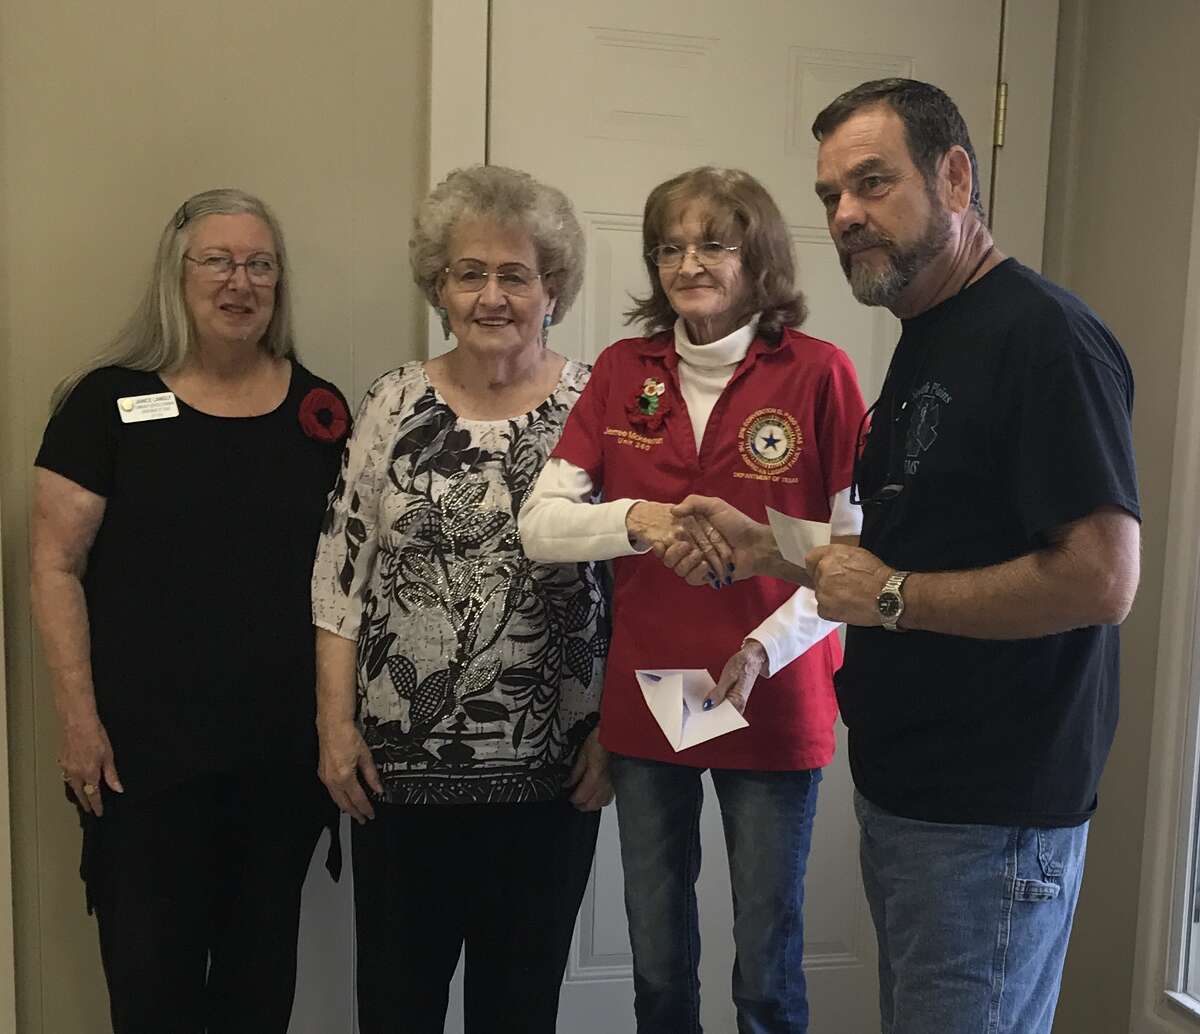 On Monday, three representatives of the American Legion Auxiliary Unit 260 in Plainview, Secretary Janice Langley (left), Theta Vaughan and President Jerree McKeeman, visited Lubbock to deliver a donation to Gary Vaughn, president of the Texas South Plains Honor Flight. The check represents funds collected through to sale of poppies to area residents. The donation is to honor and help send a veteran to Washington, D.C. on a trip of a lifetime. The next Honor Flight from Lubbock leaves Oct. 1.